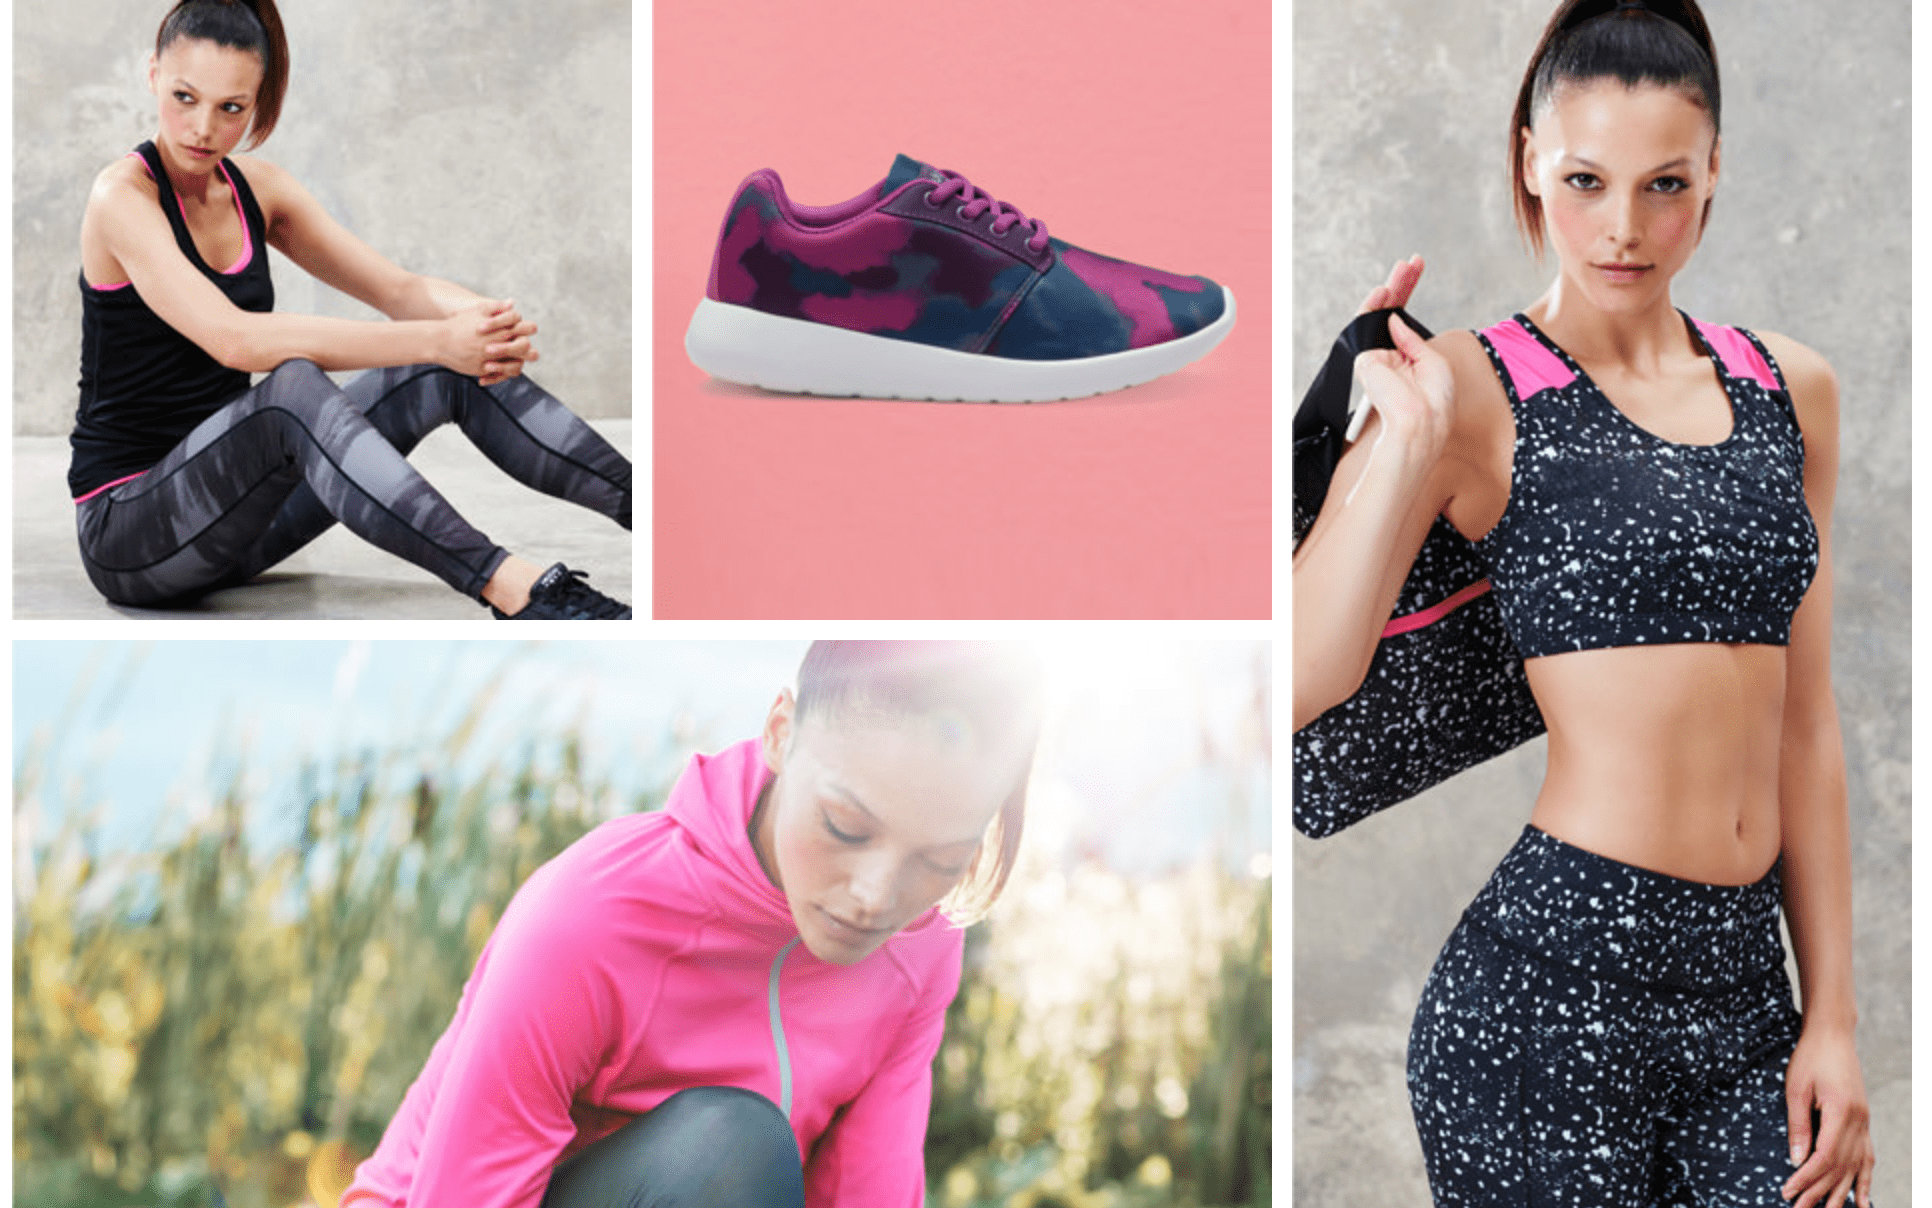 Where to buy budget workout gear - cheap exercise clothes